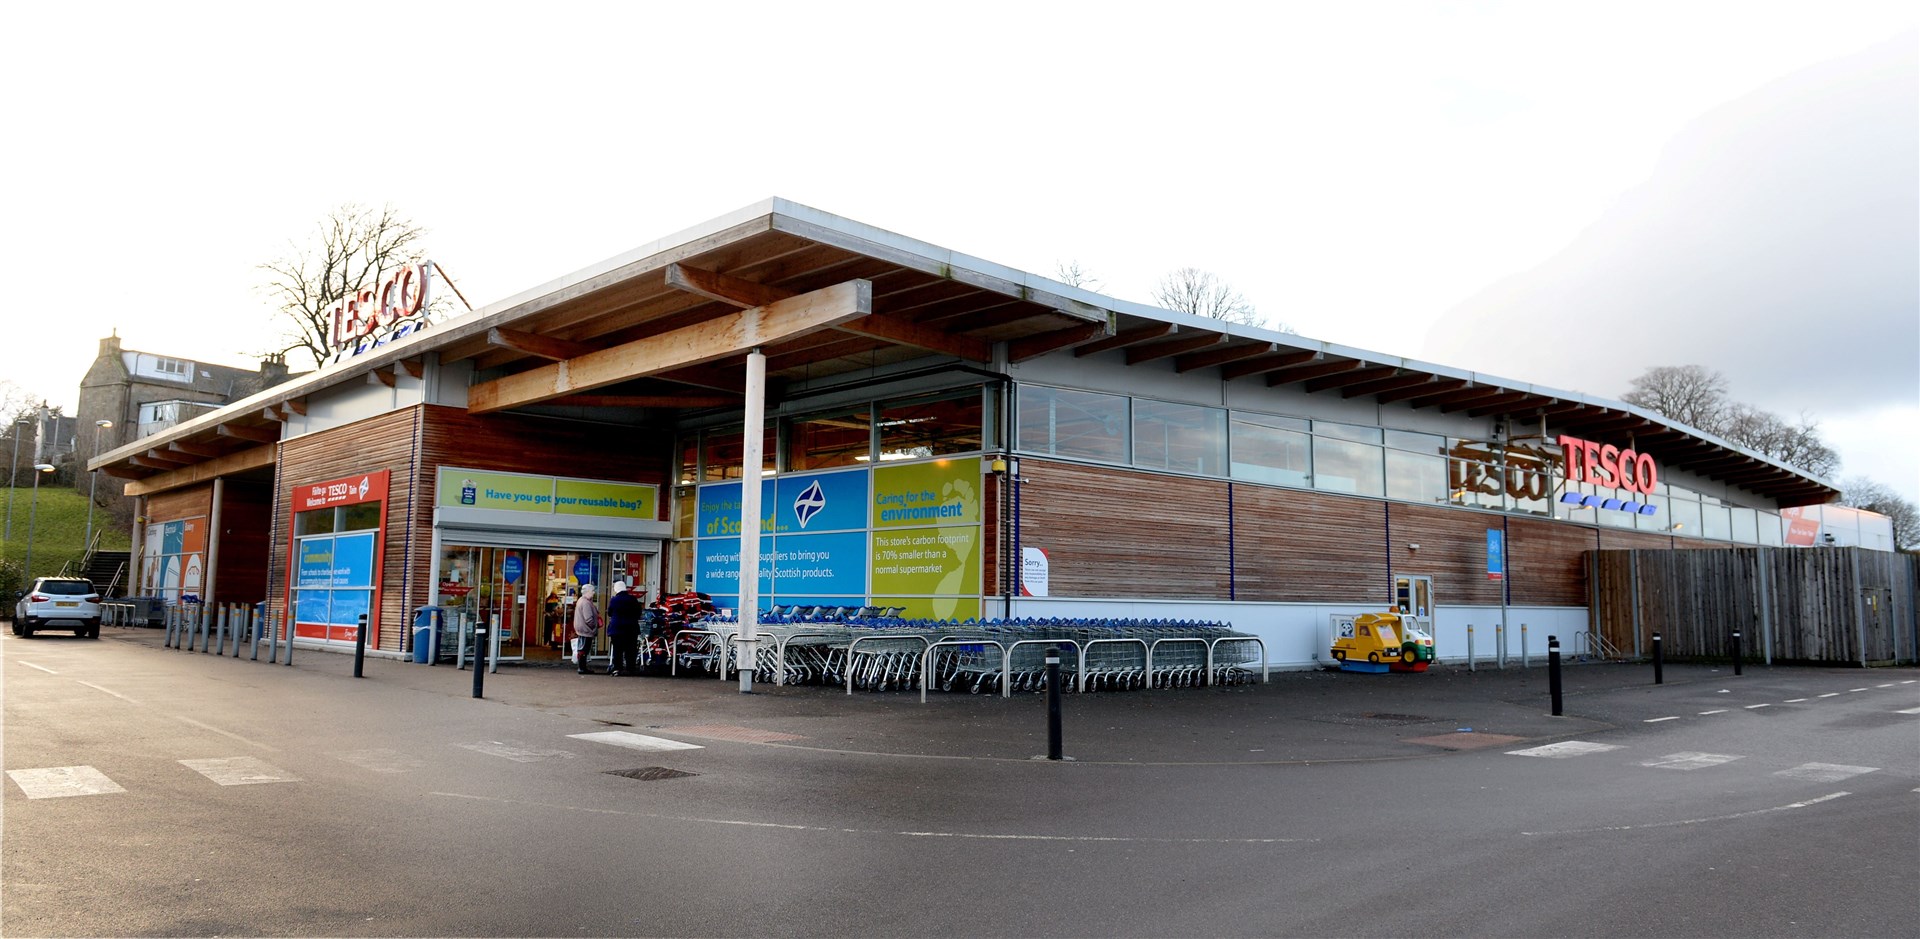 The Tesco store in Tain.